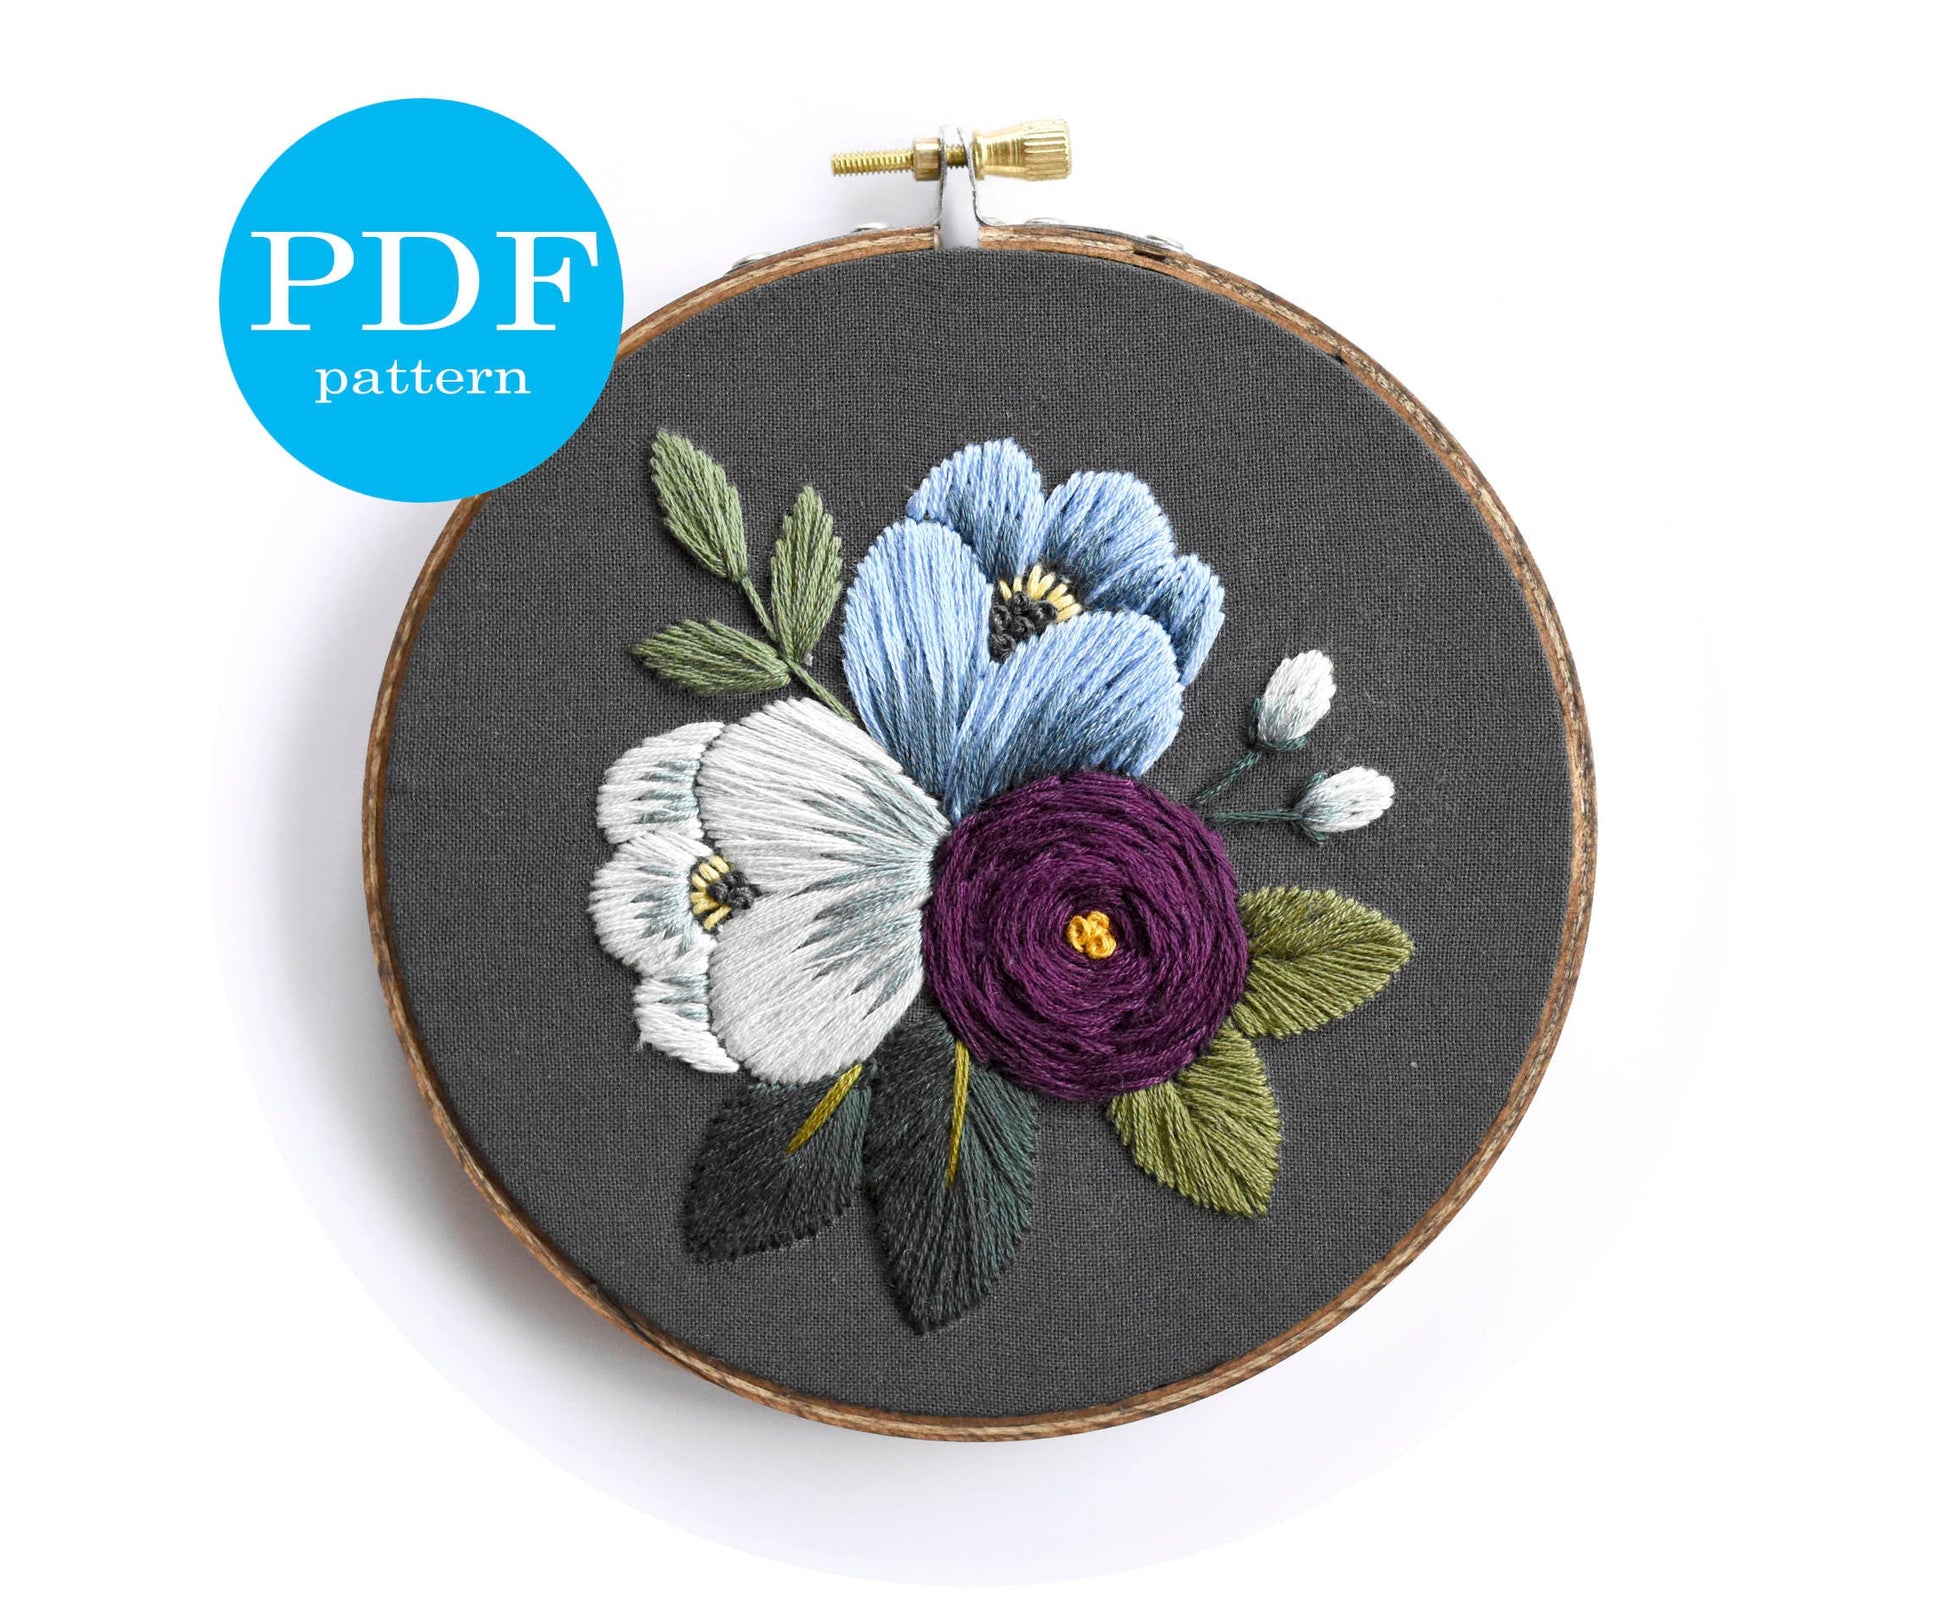 Tulip Embroidery Pattern. Digital Download. 5" embroidery hoop. DIY Home Decor. Beginner Embroidery pattern. Flower embroidery pattern.